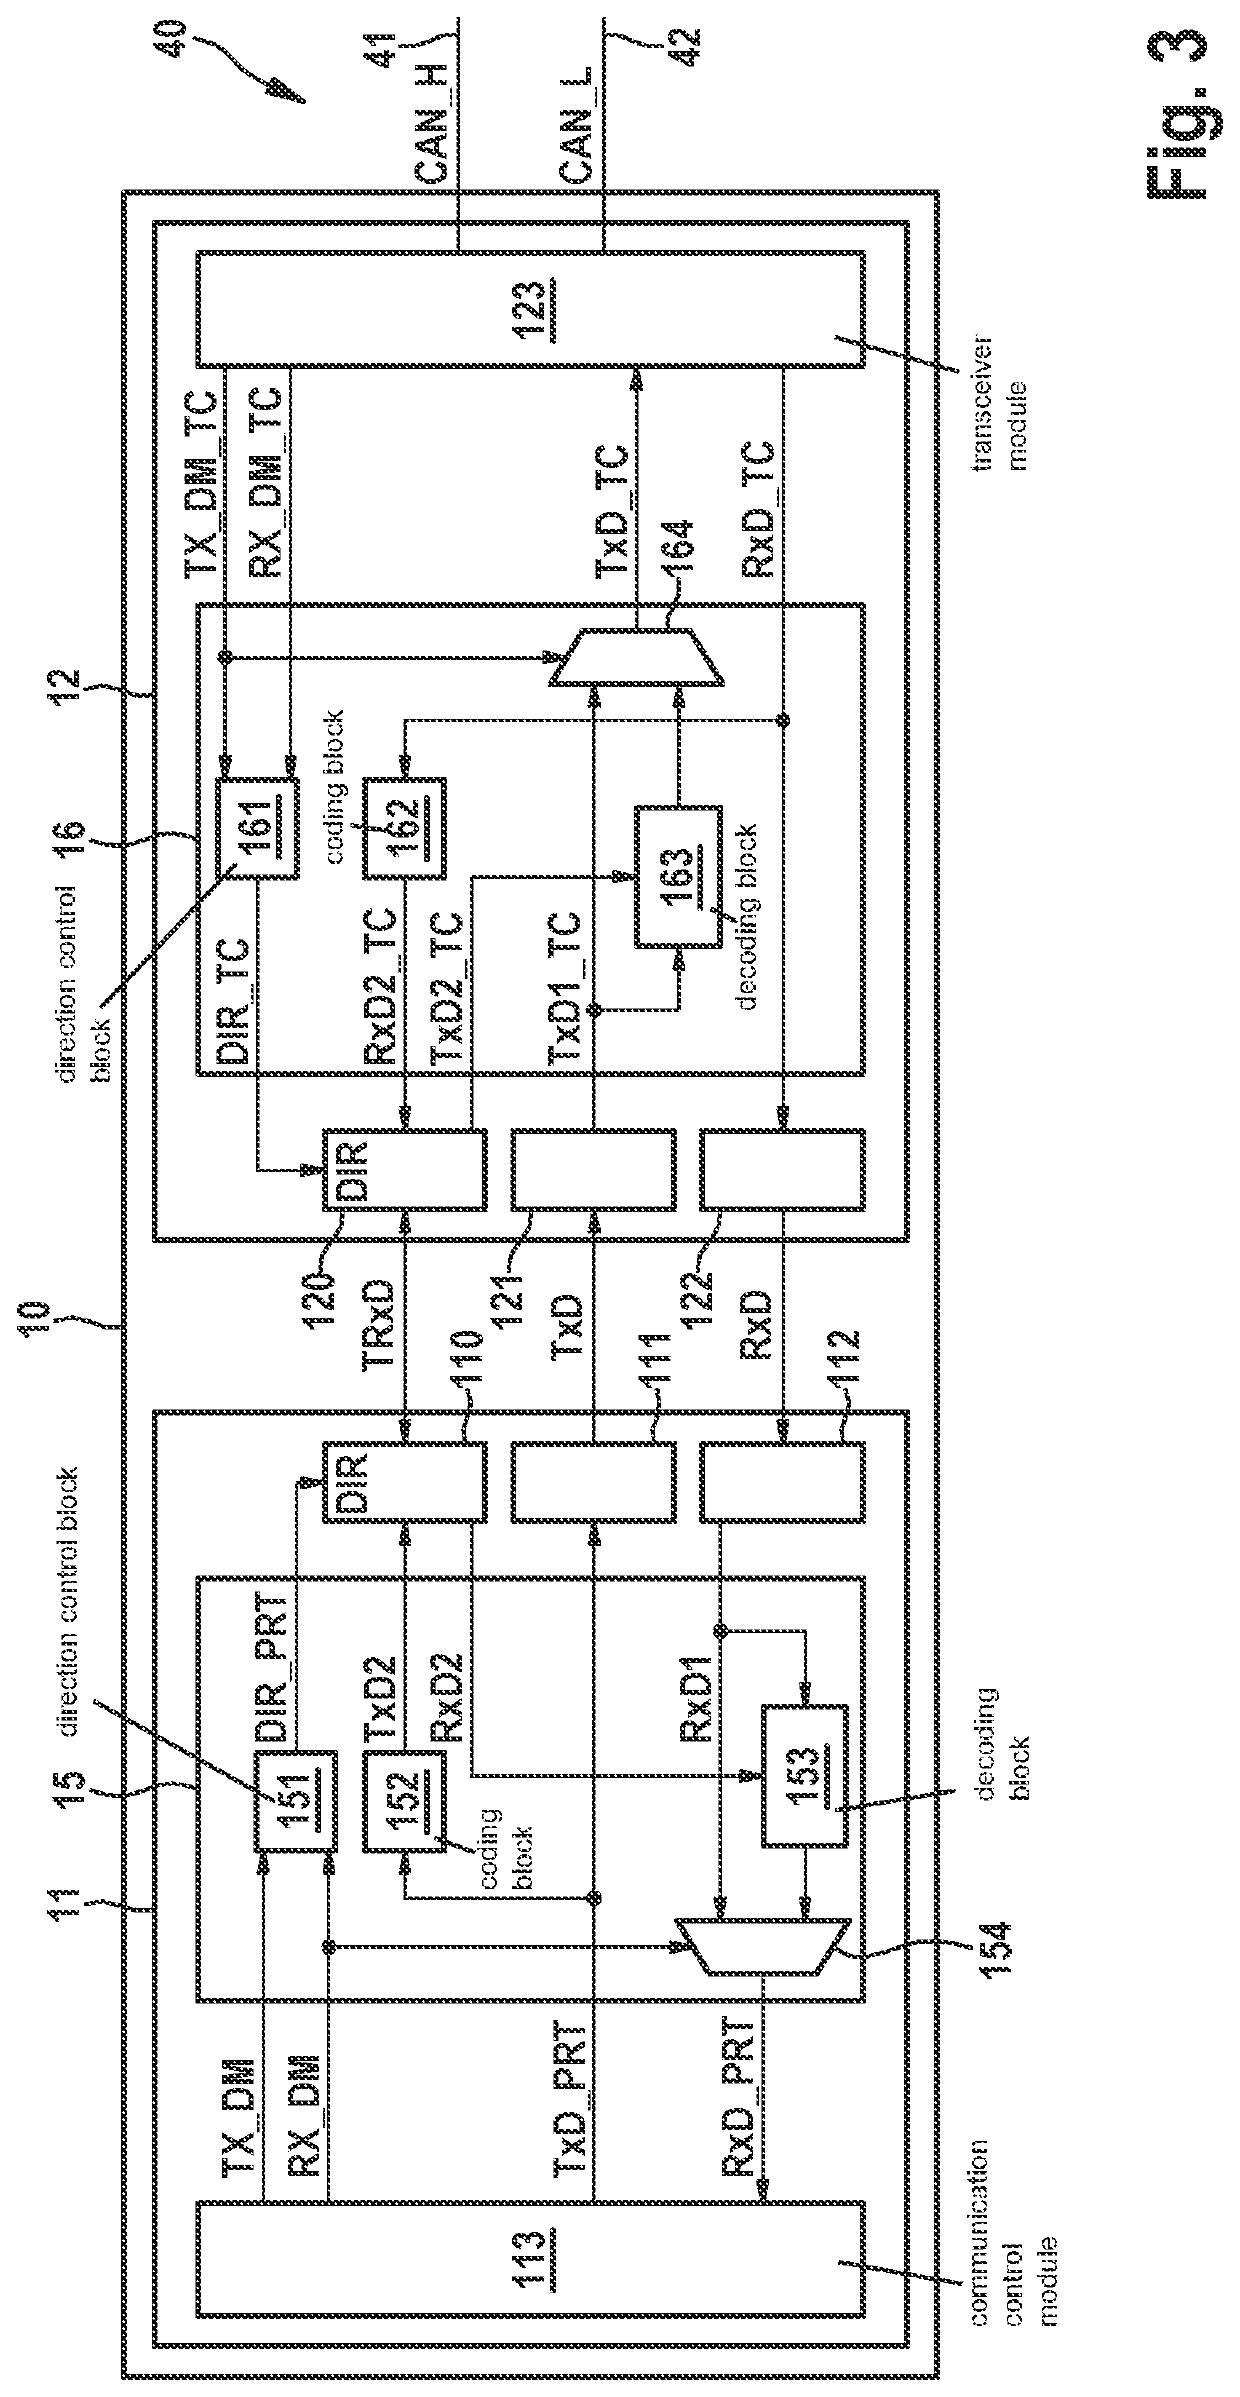 Communication control device and transceiver for a user station of a serial bus system, and method for communicating in a serial bus system